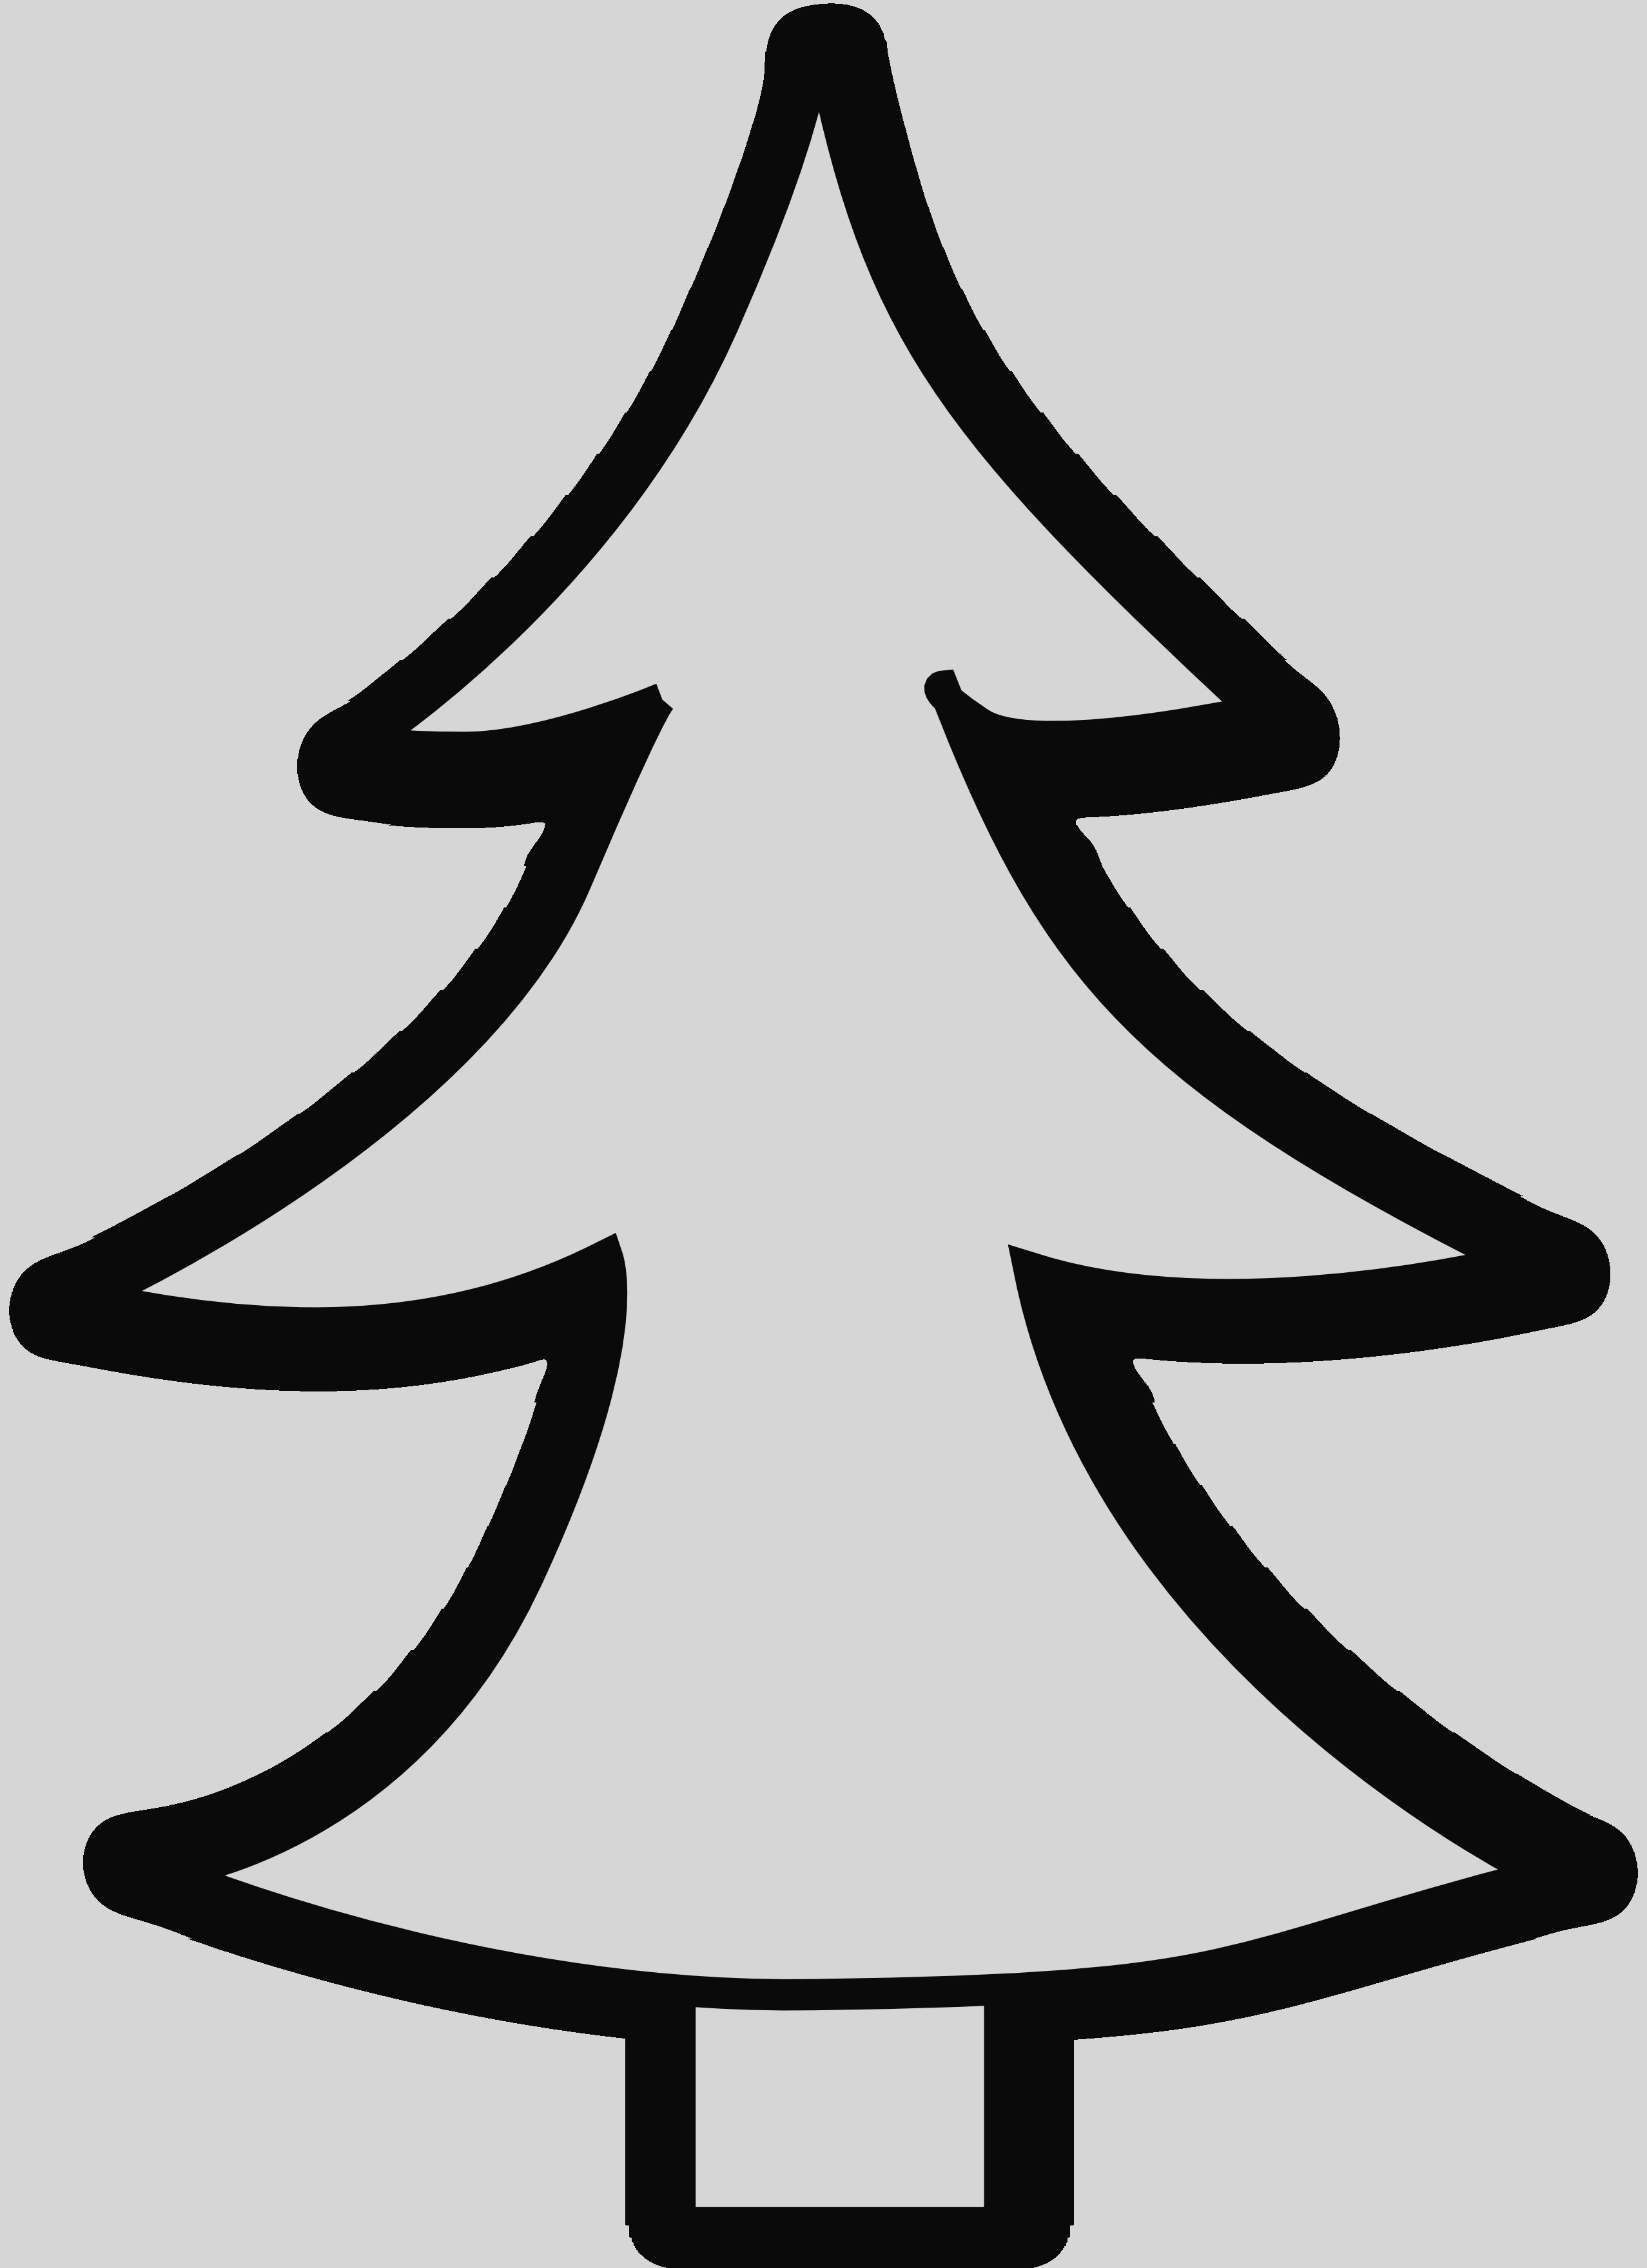 Download Christmas Tree Clipart Black And White Christmas Trees Black And White Free Clipart Christmas Tree Png Image With No Background Pngkey Com